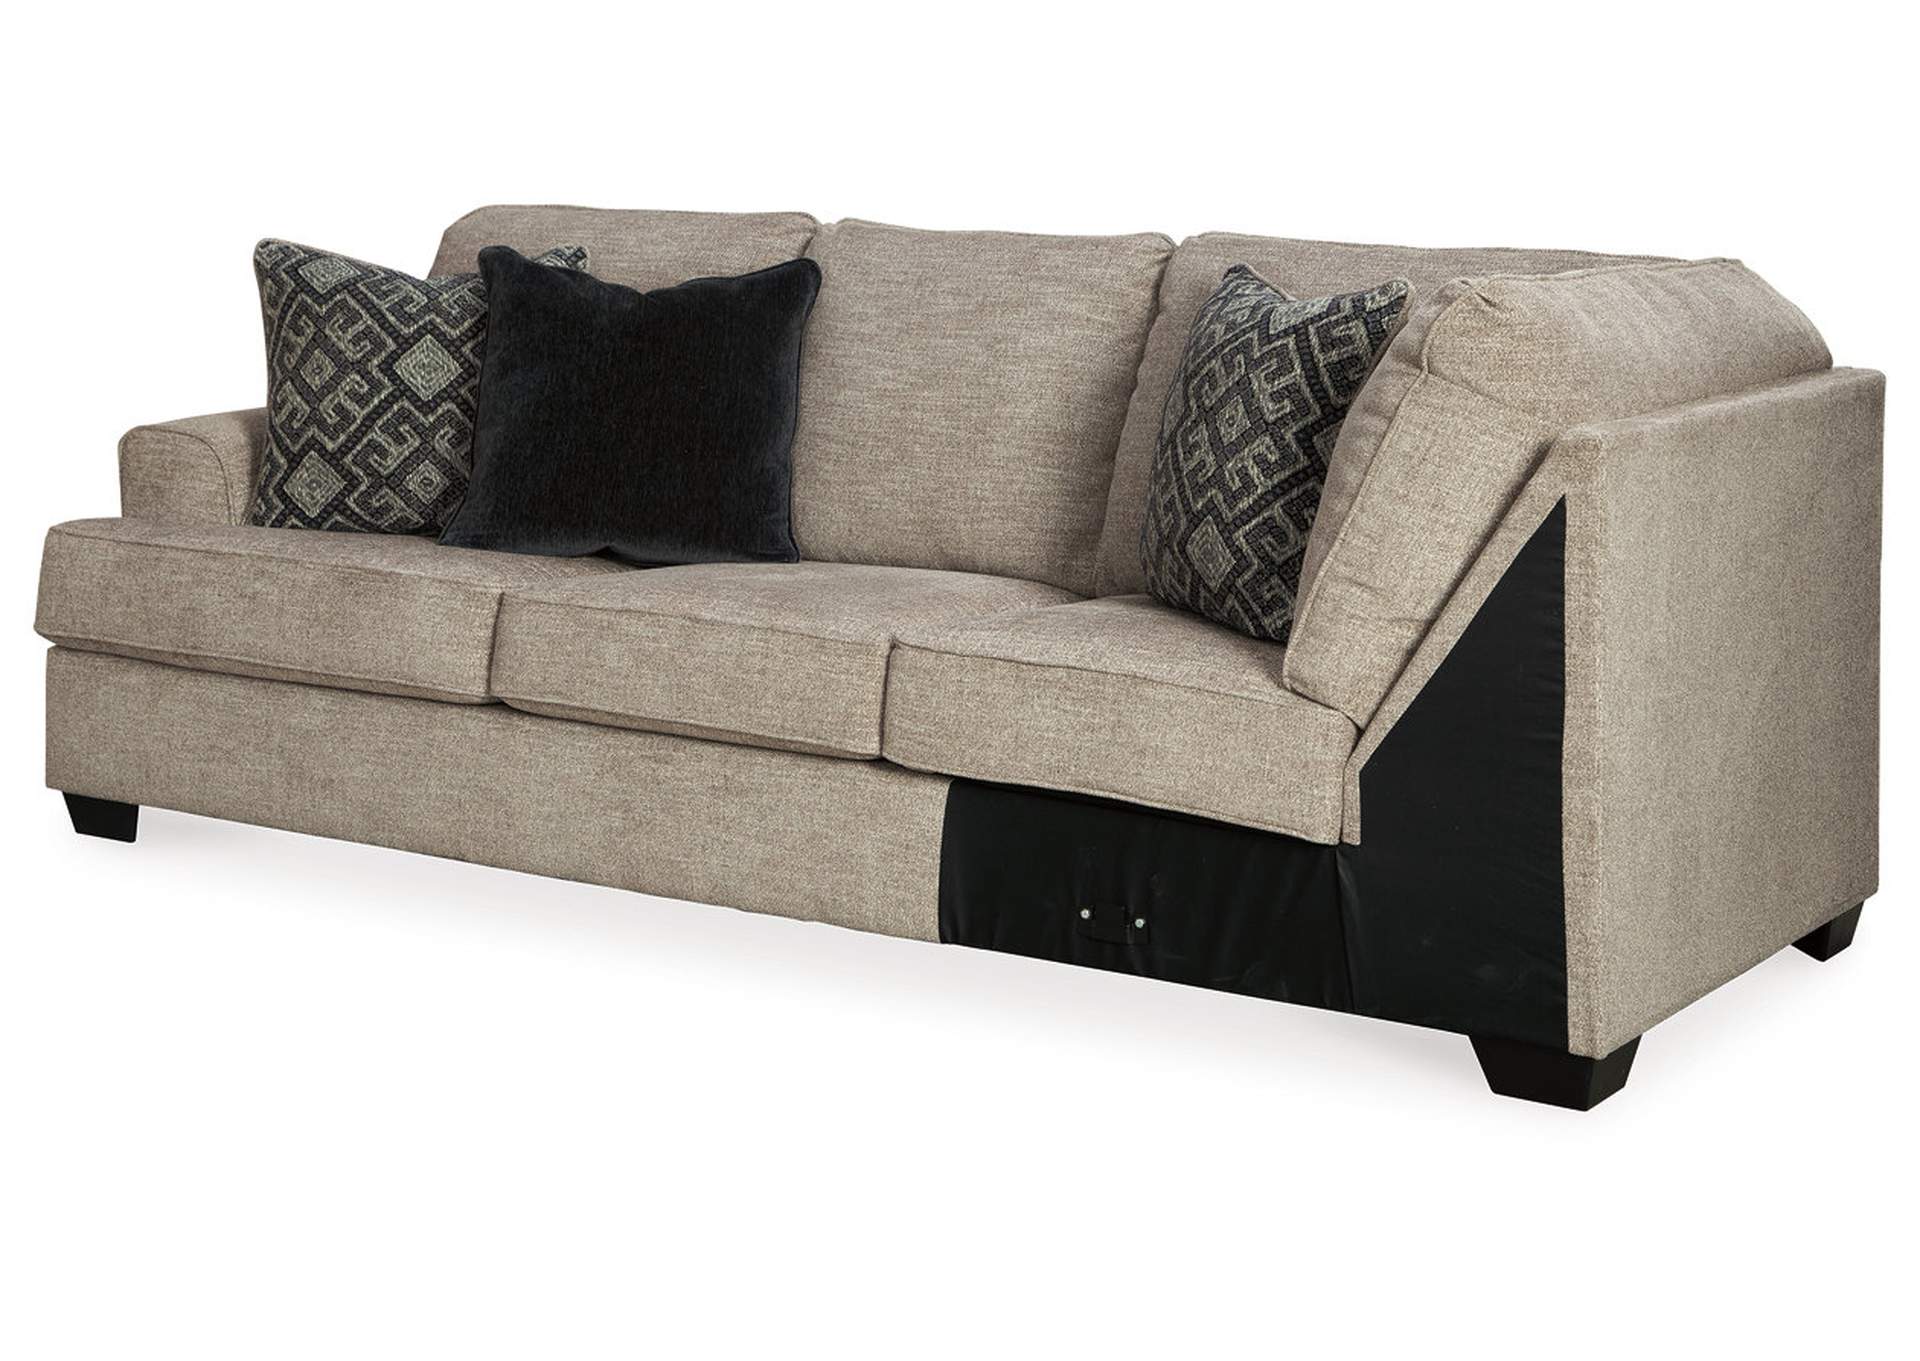 Bovarian 2-Piece Sectional with Ottoman,Signature Design By Ashley